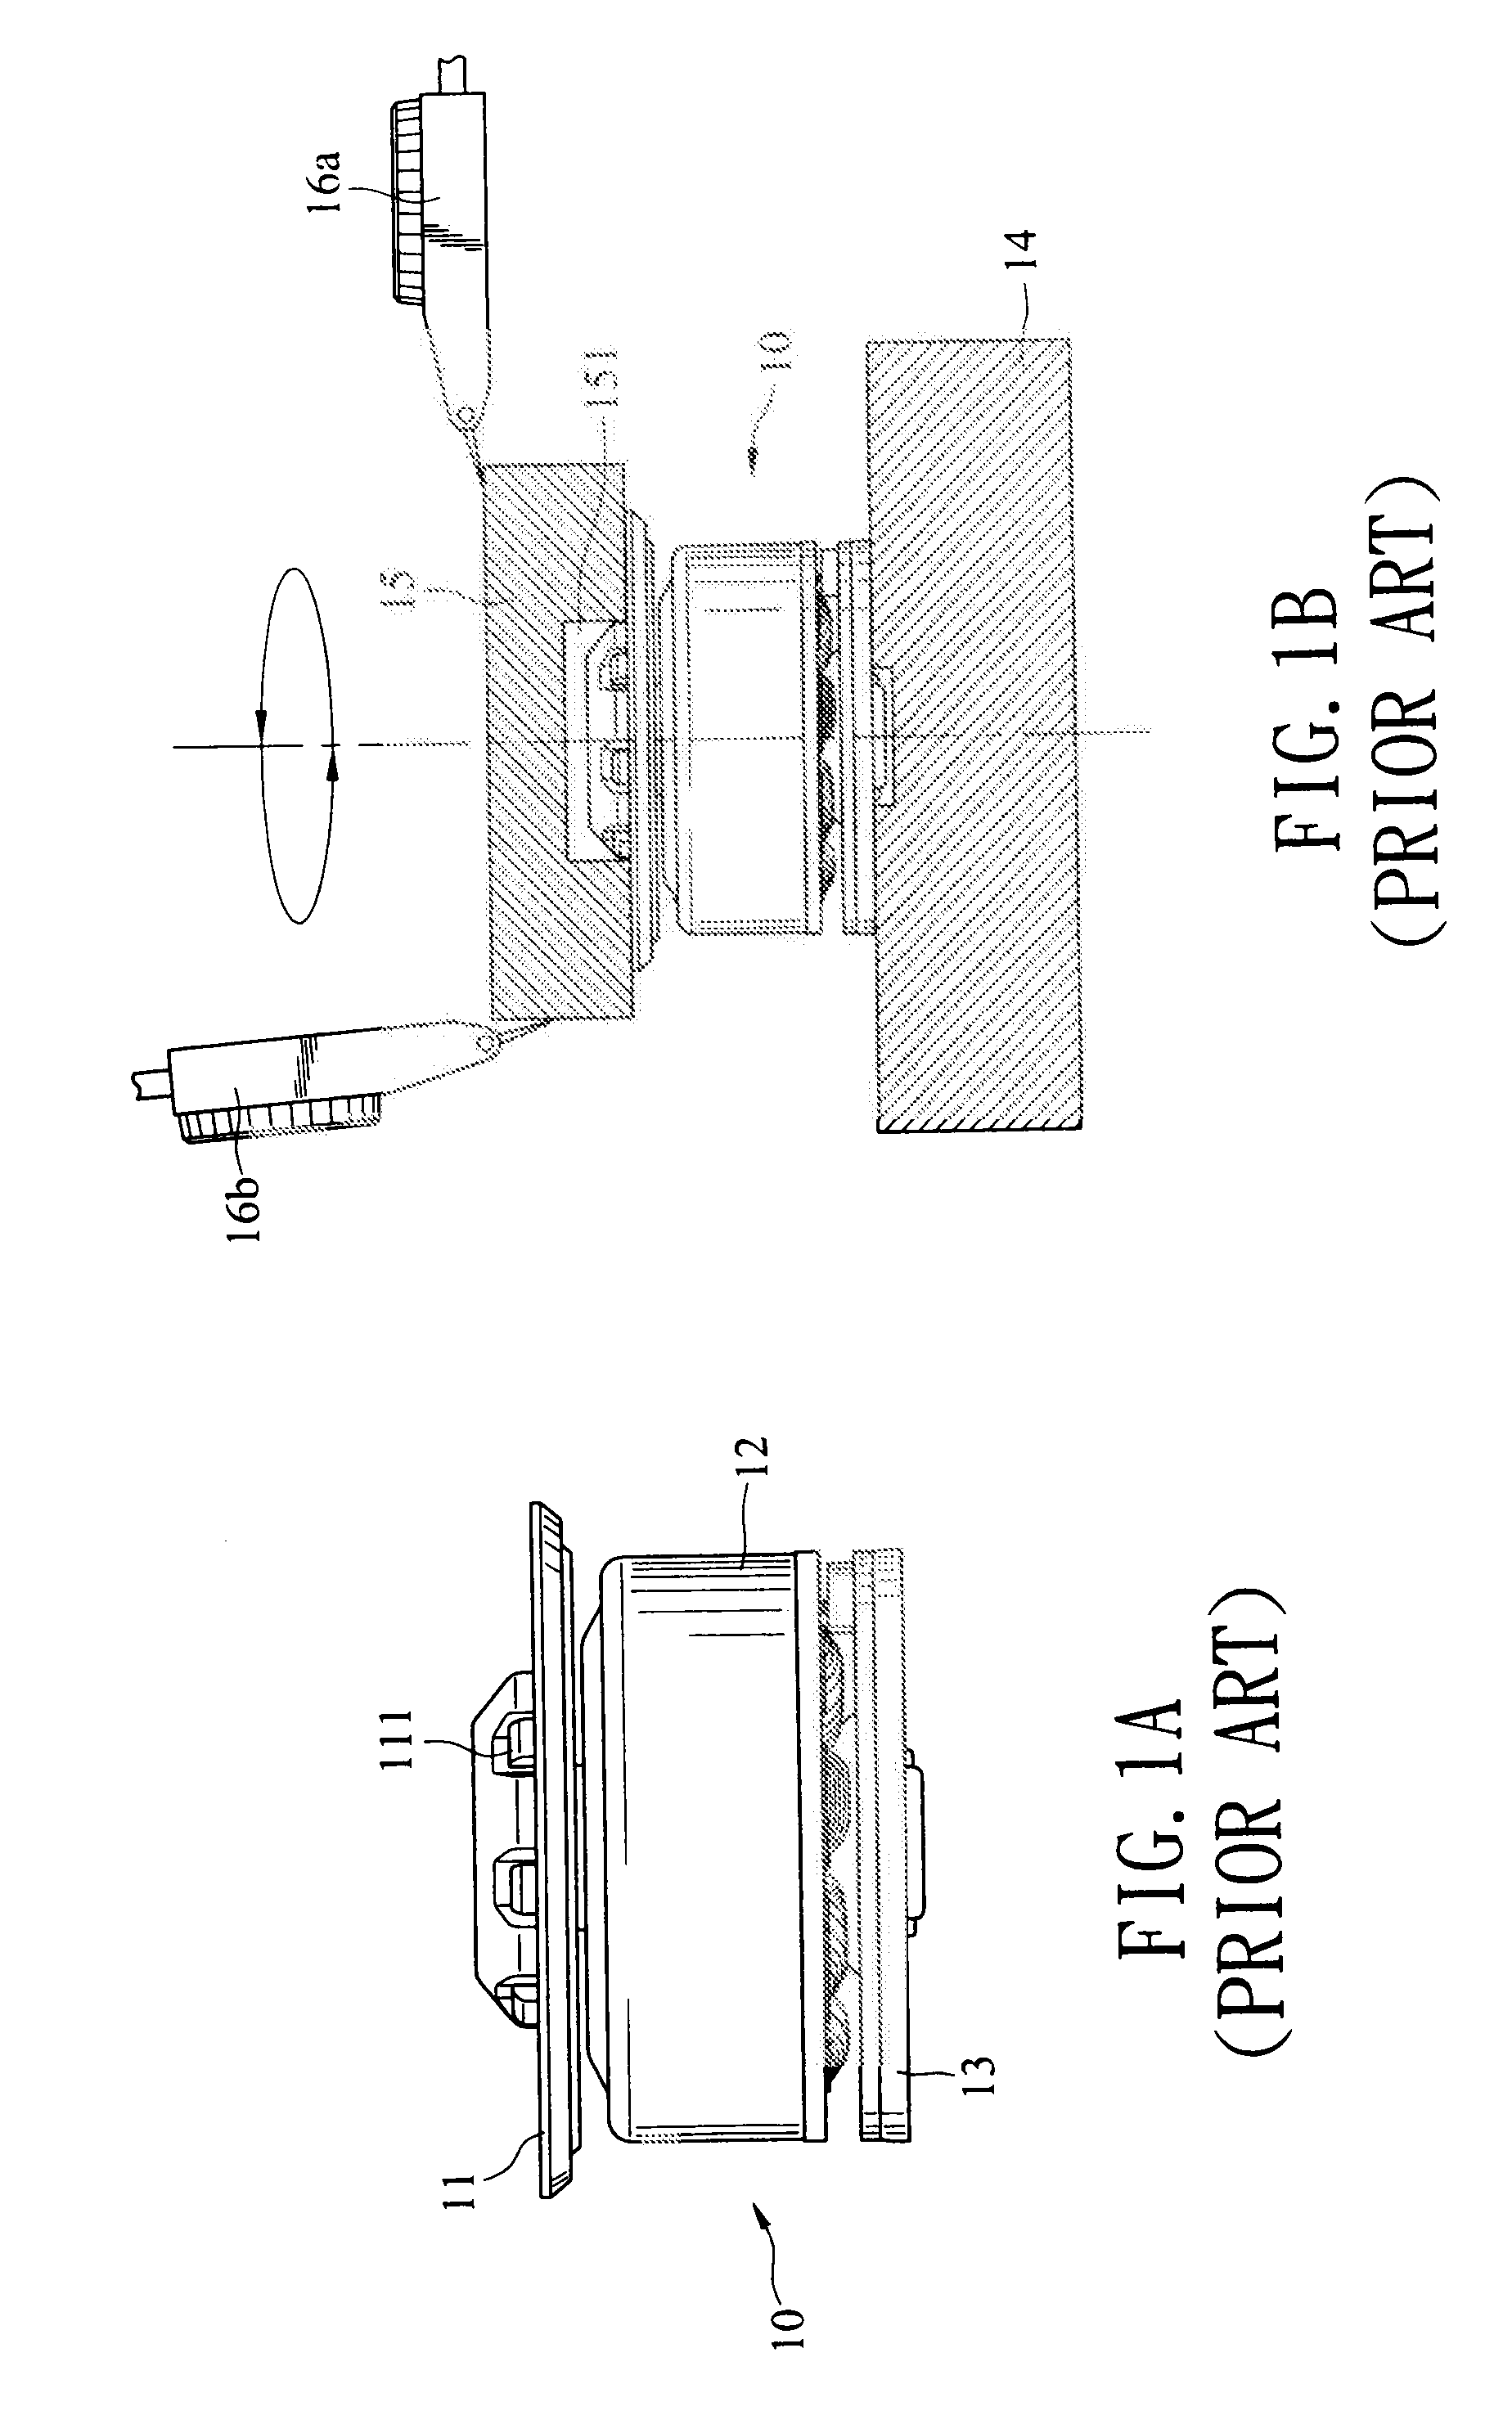 Method and Fixture for Assembling Supporting Disk of Motor Rotor